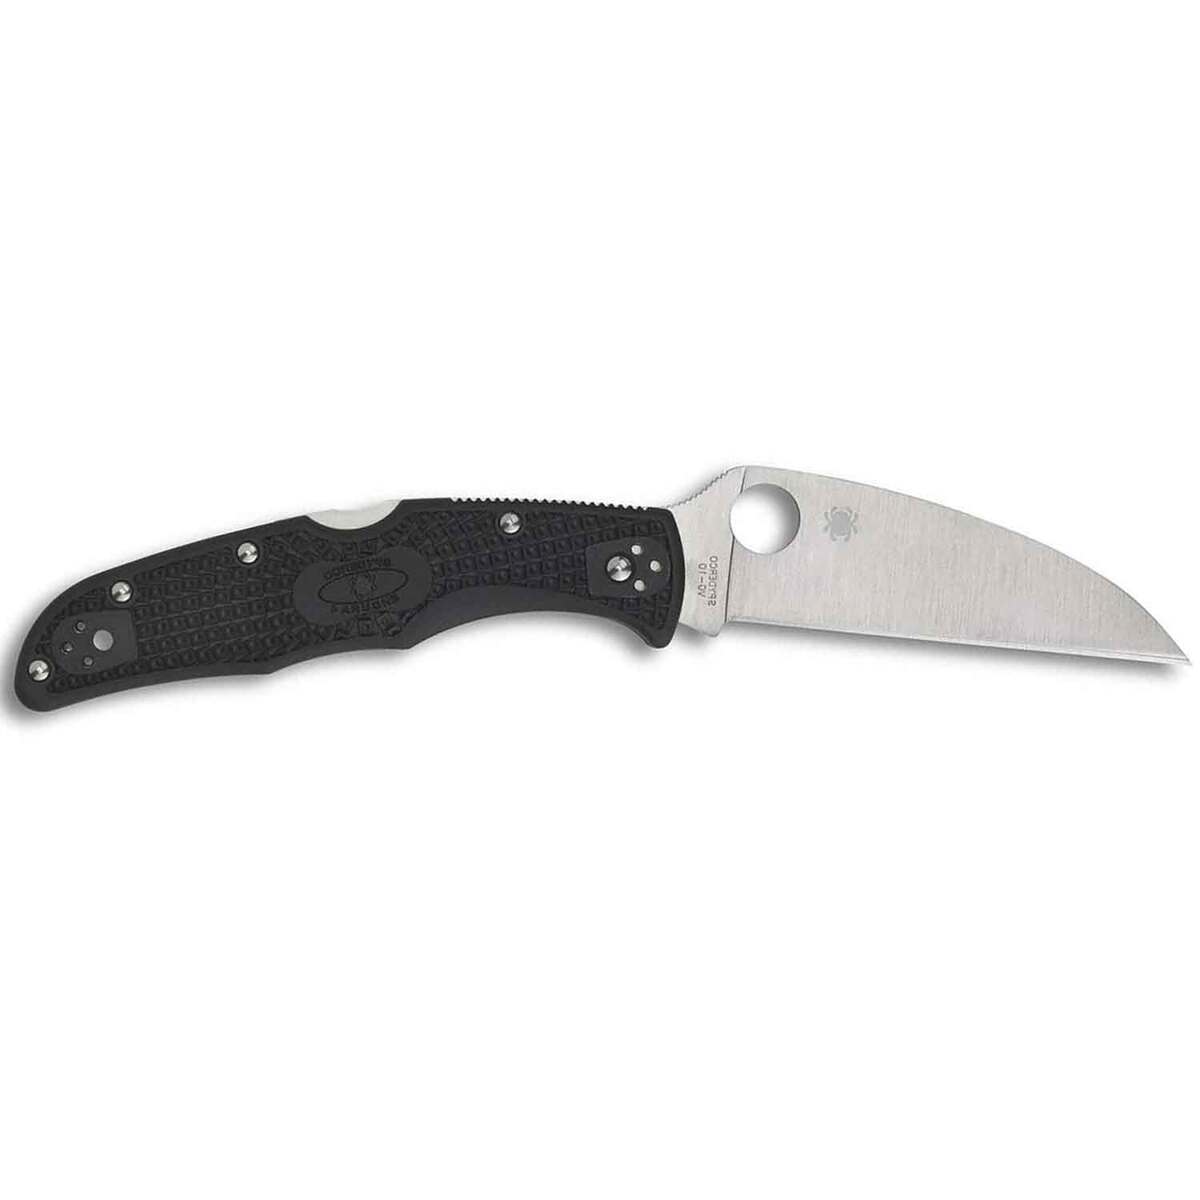  Spyderco Lightweight Kitchen Utility Knife with 4.5